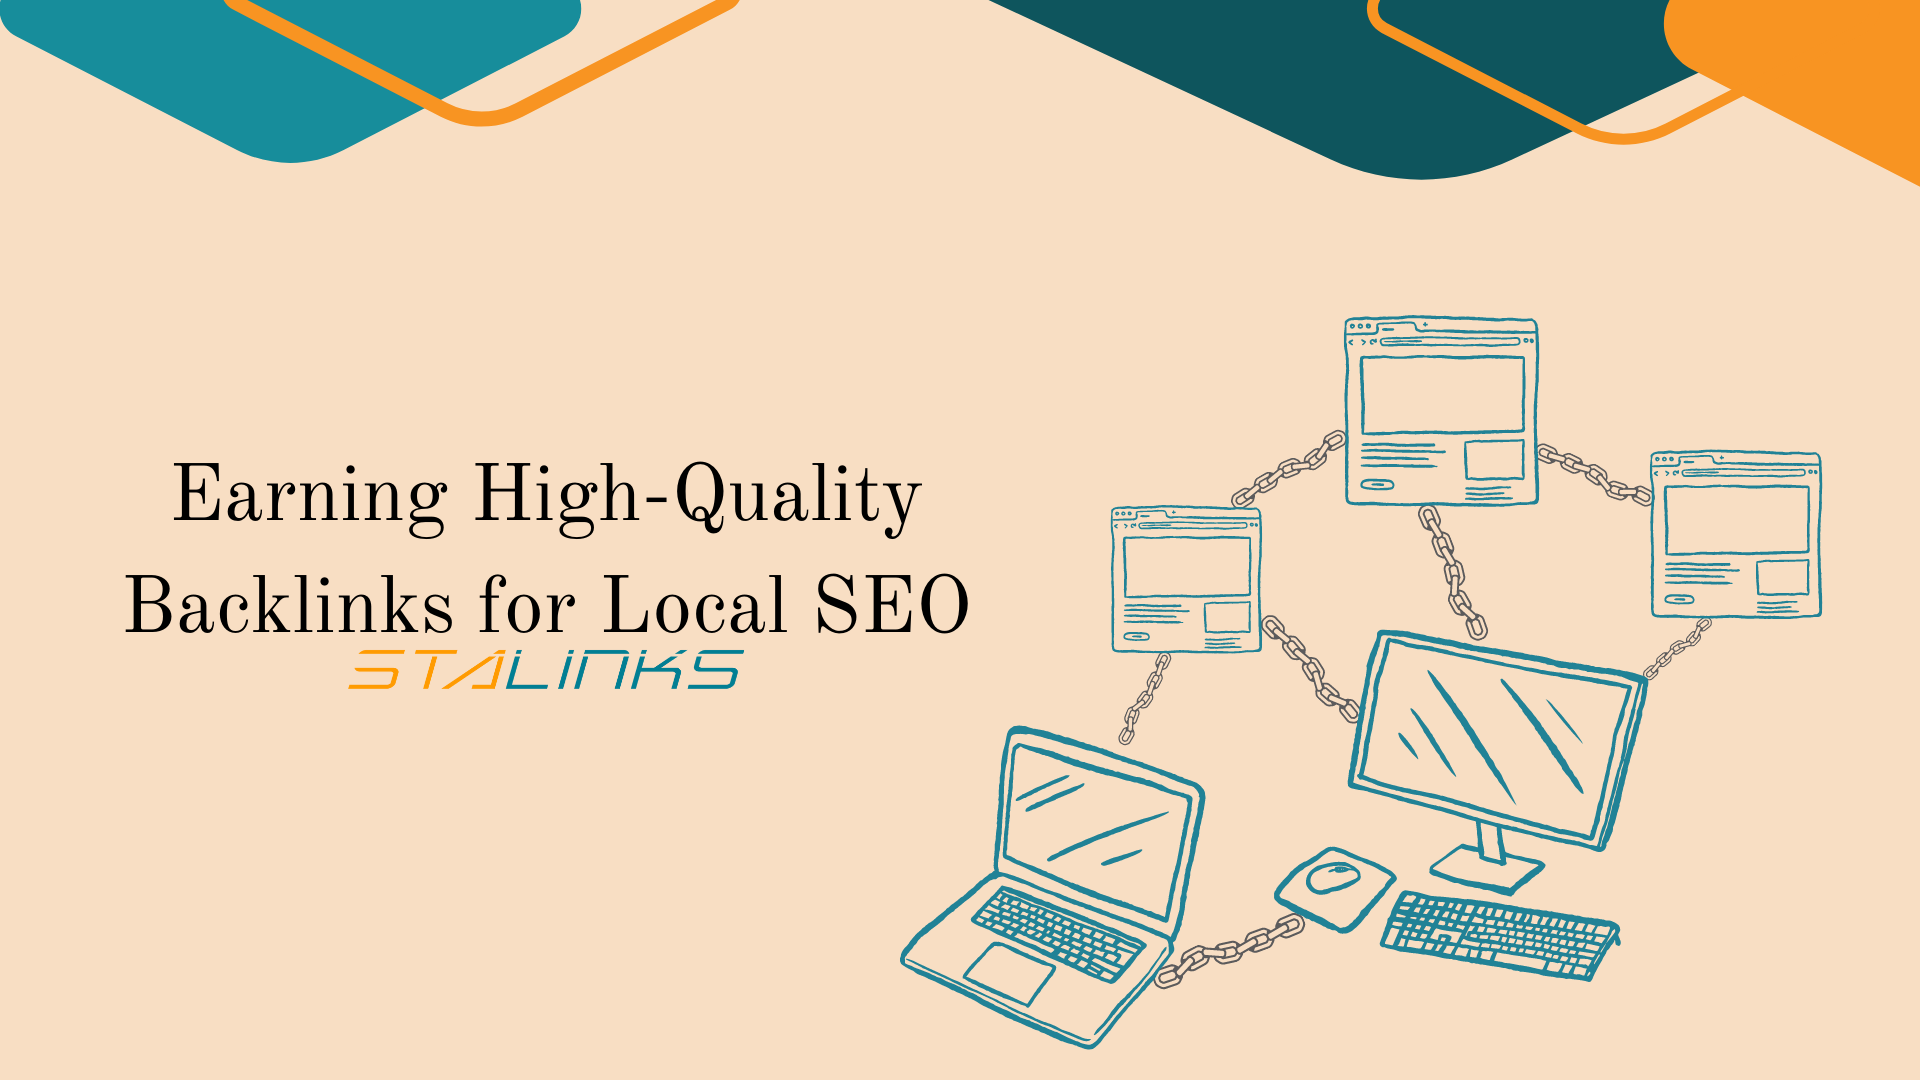 Earning High-Quality Backlinks for Local SEO